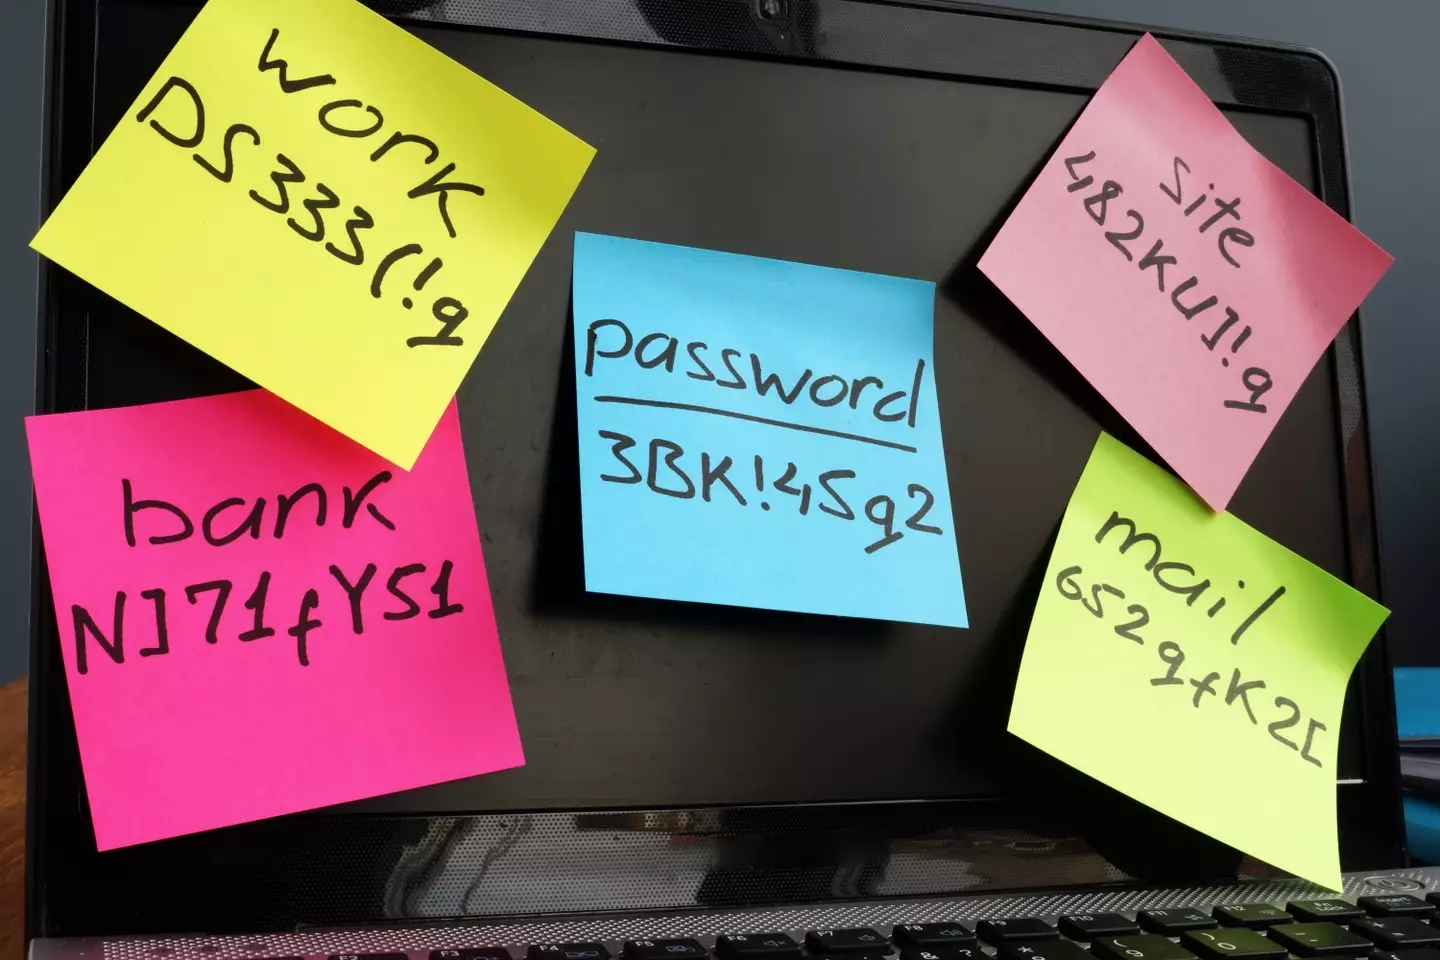 Weaker passwords make your accounts significantly more at risk (